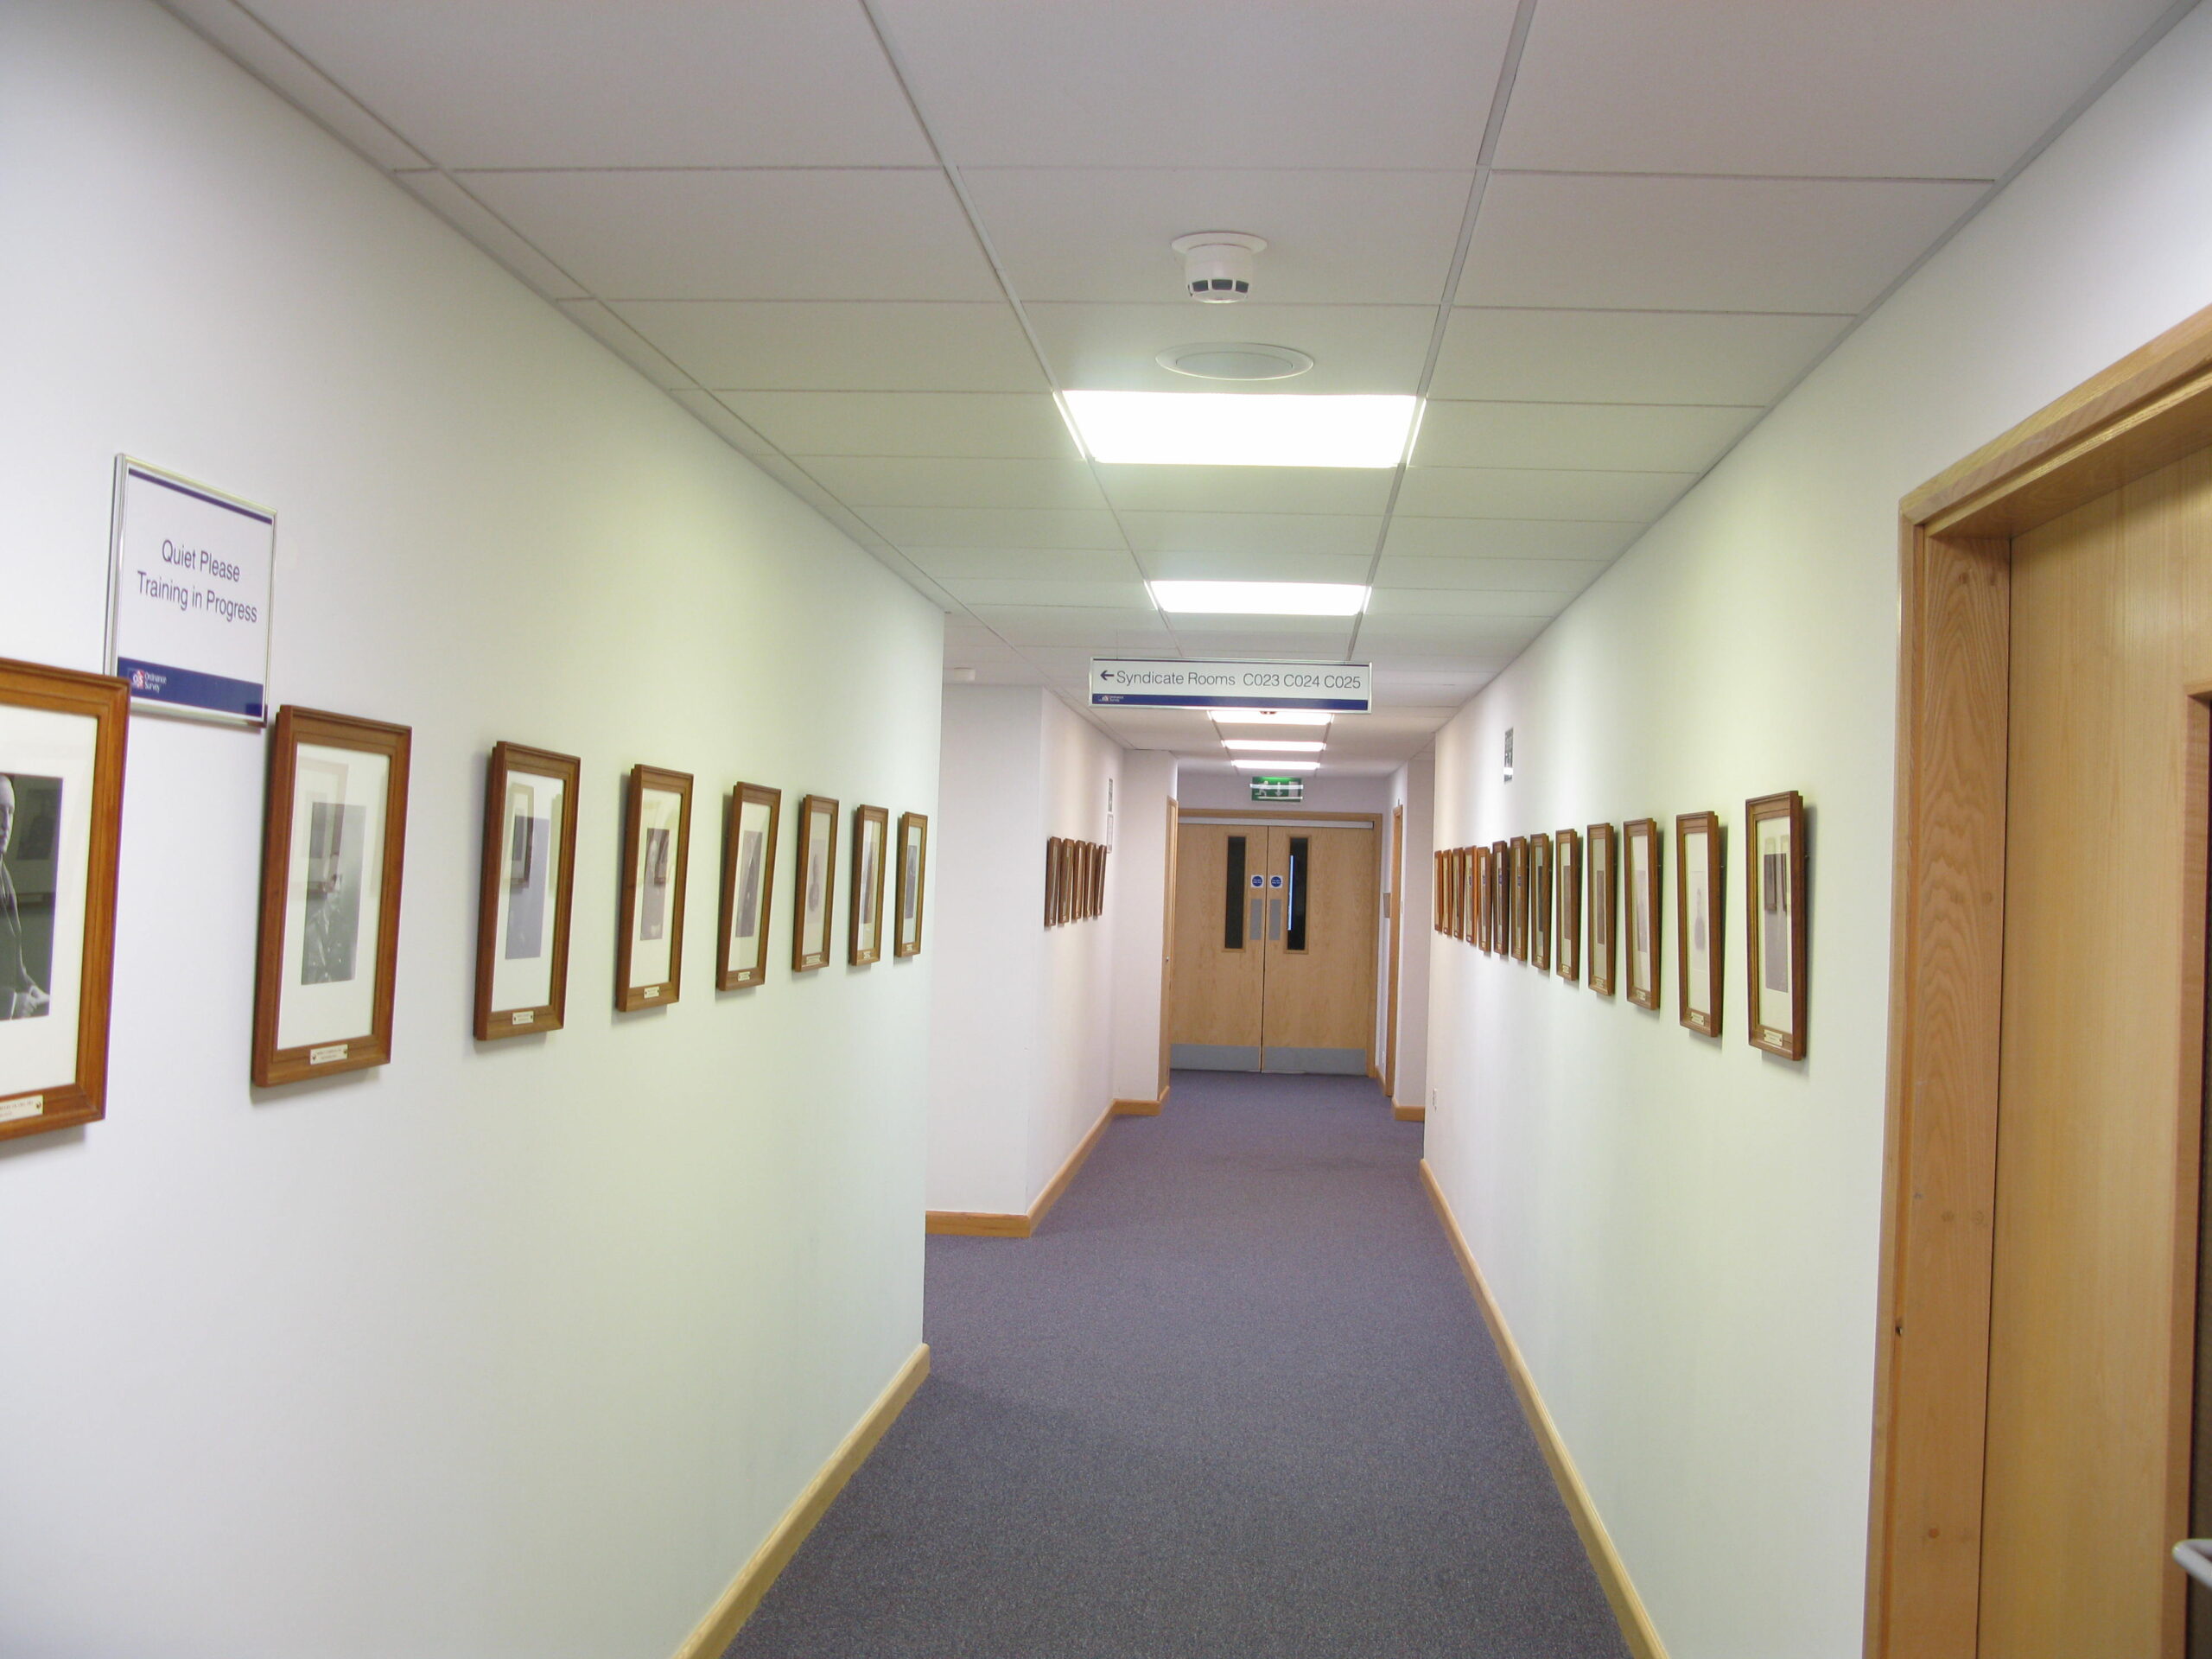 The famous DGs (Director Generals) corridor, with a photo of every DG, behind the Map Shop.